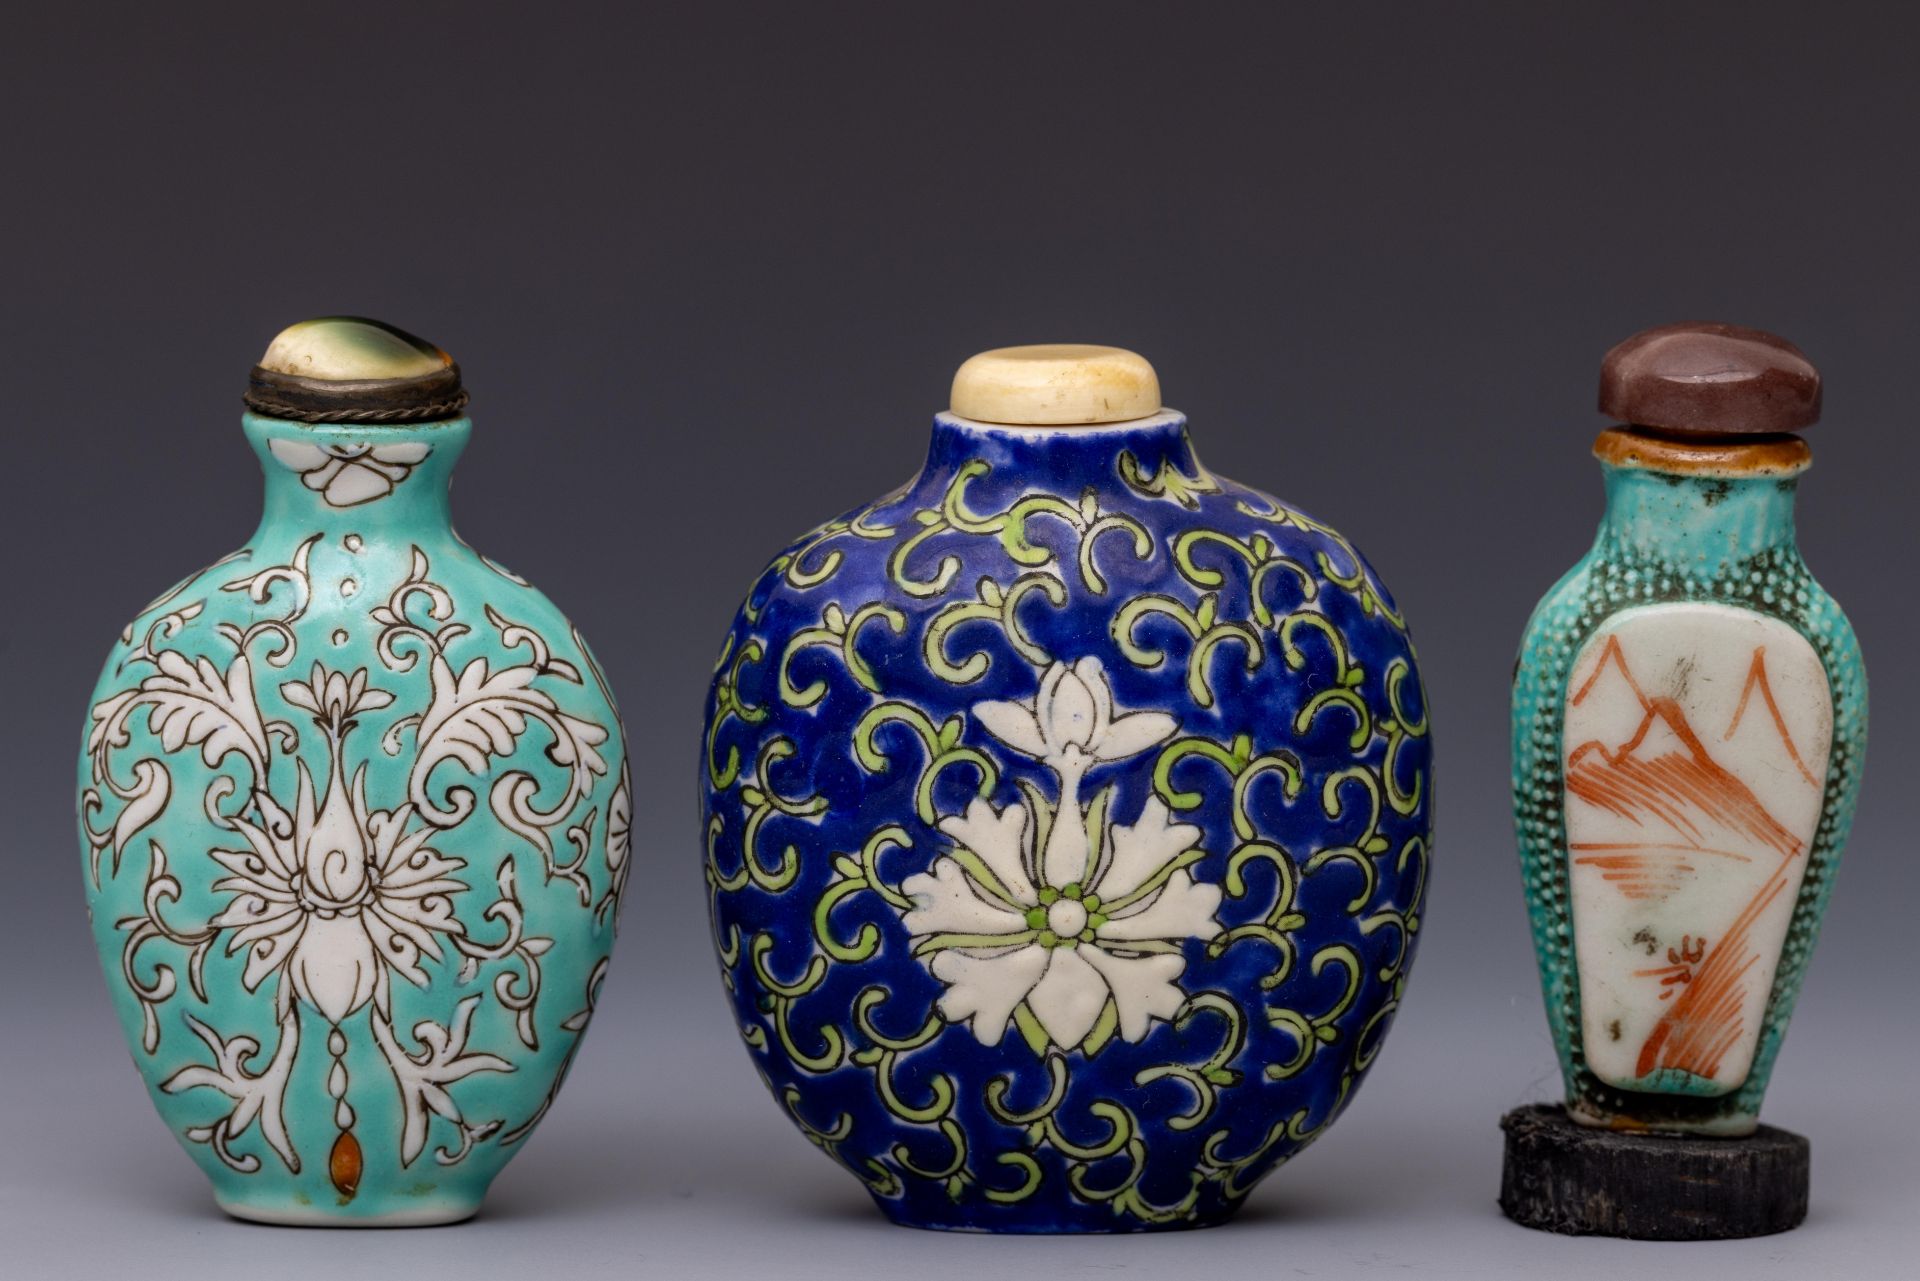 China, three polychrome porcelain snuff bottles and stoppers, late Qing dynasty (1644-1912),